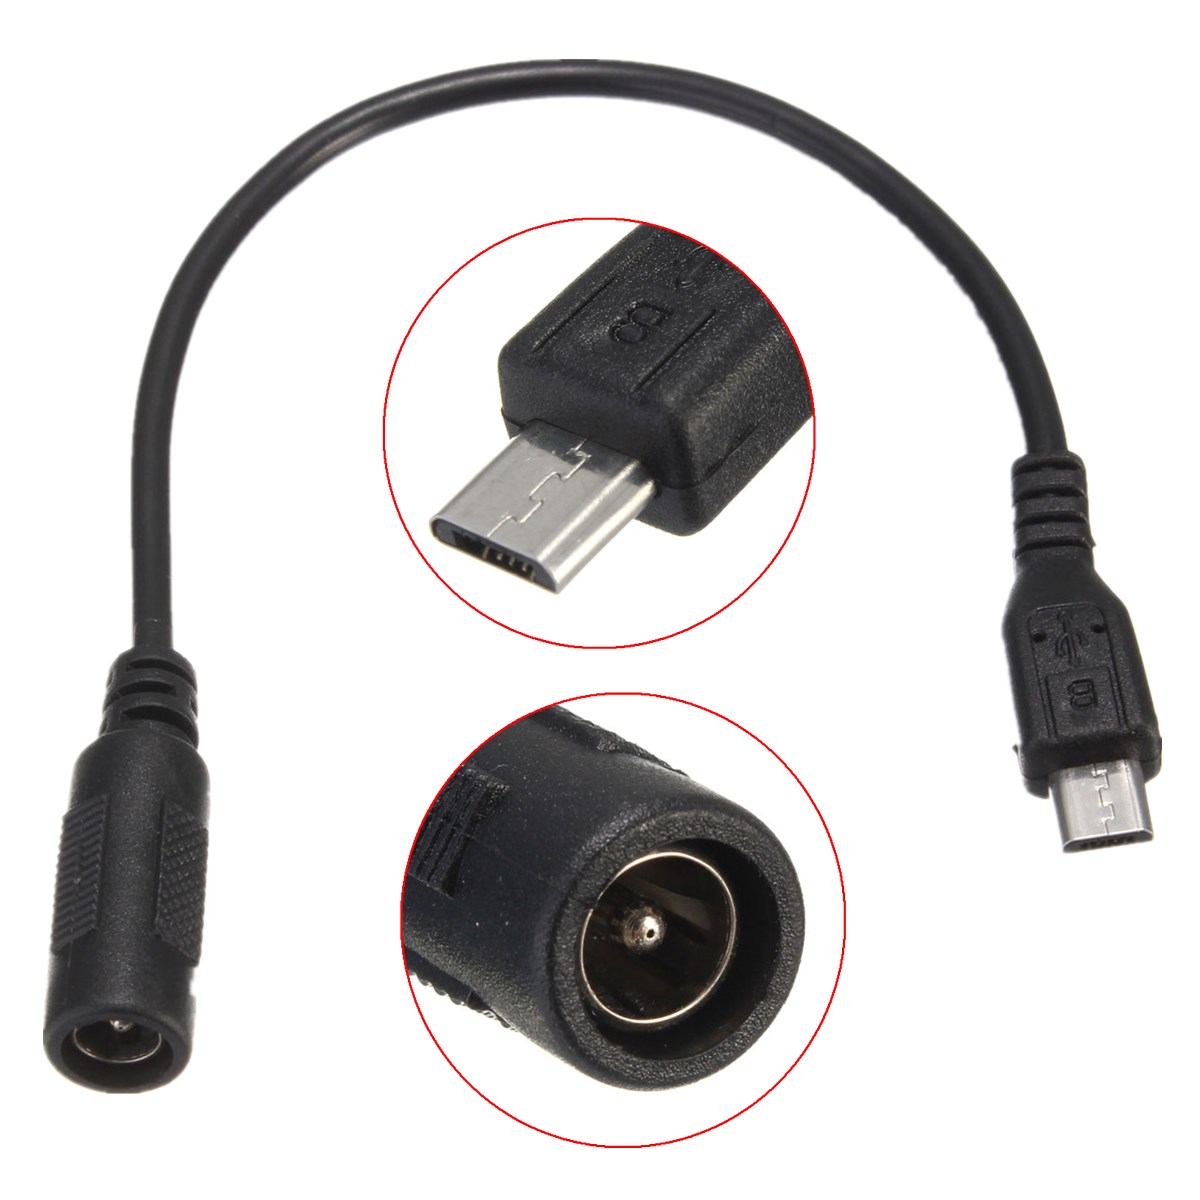 Barrel Type 5.5mm 2.1mm Female to Micro USB Male Power Adapter